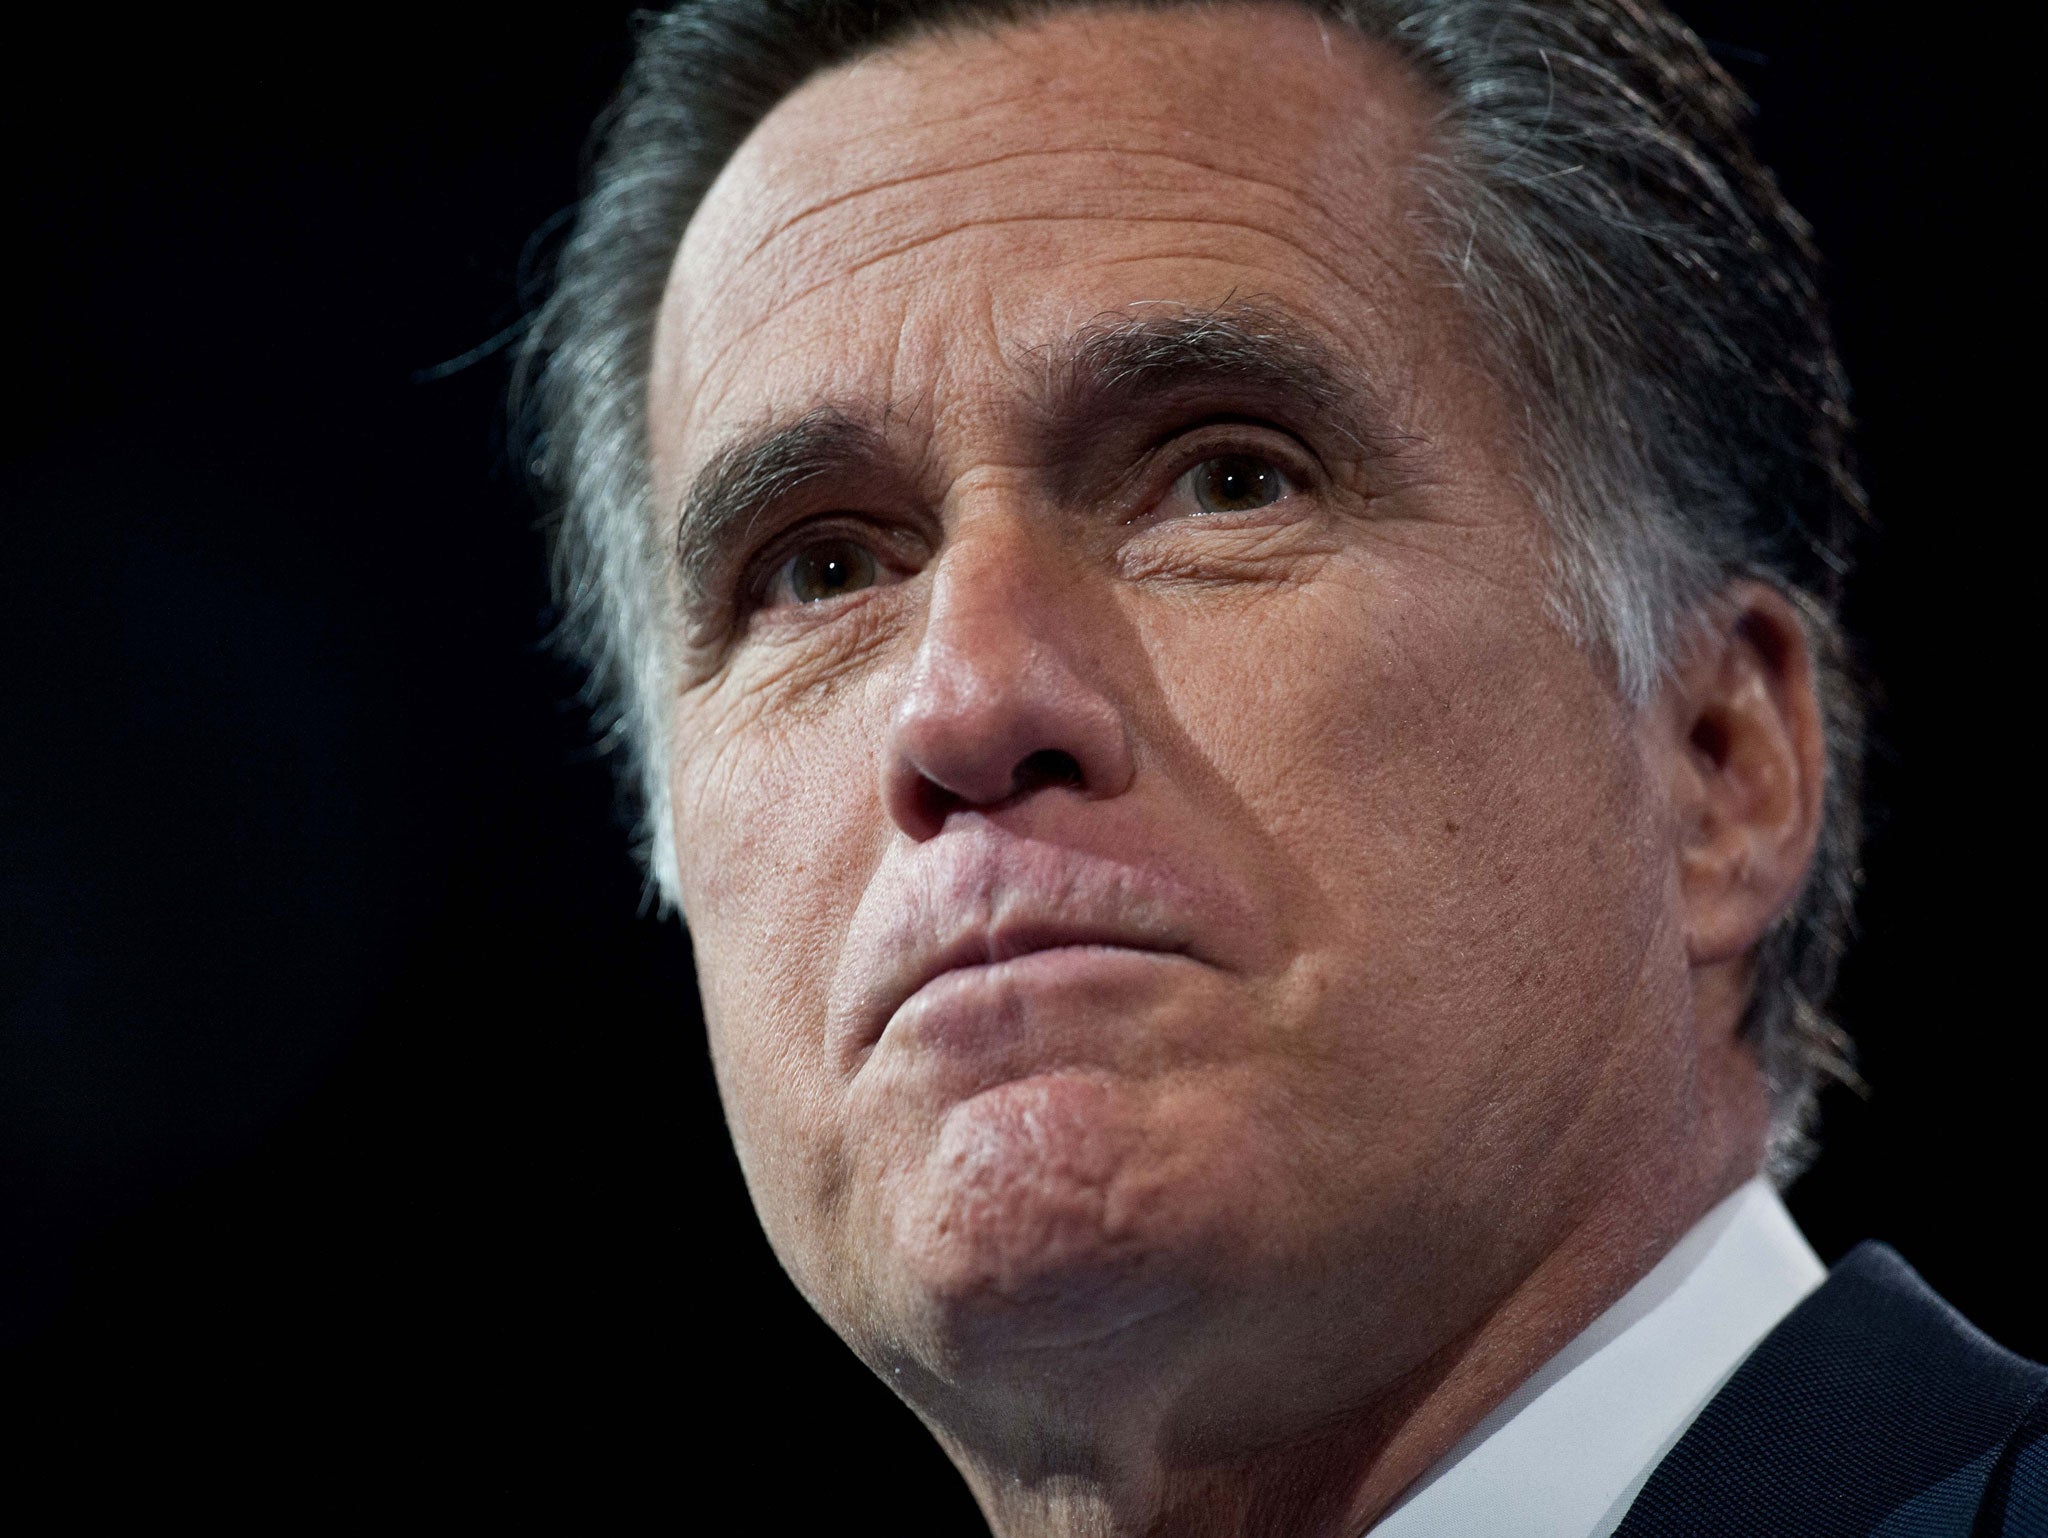 Jeb Bush has questioned parts of the strategy employed by Mitt Romney (pictured) in 2012 (Getty Images)